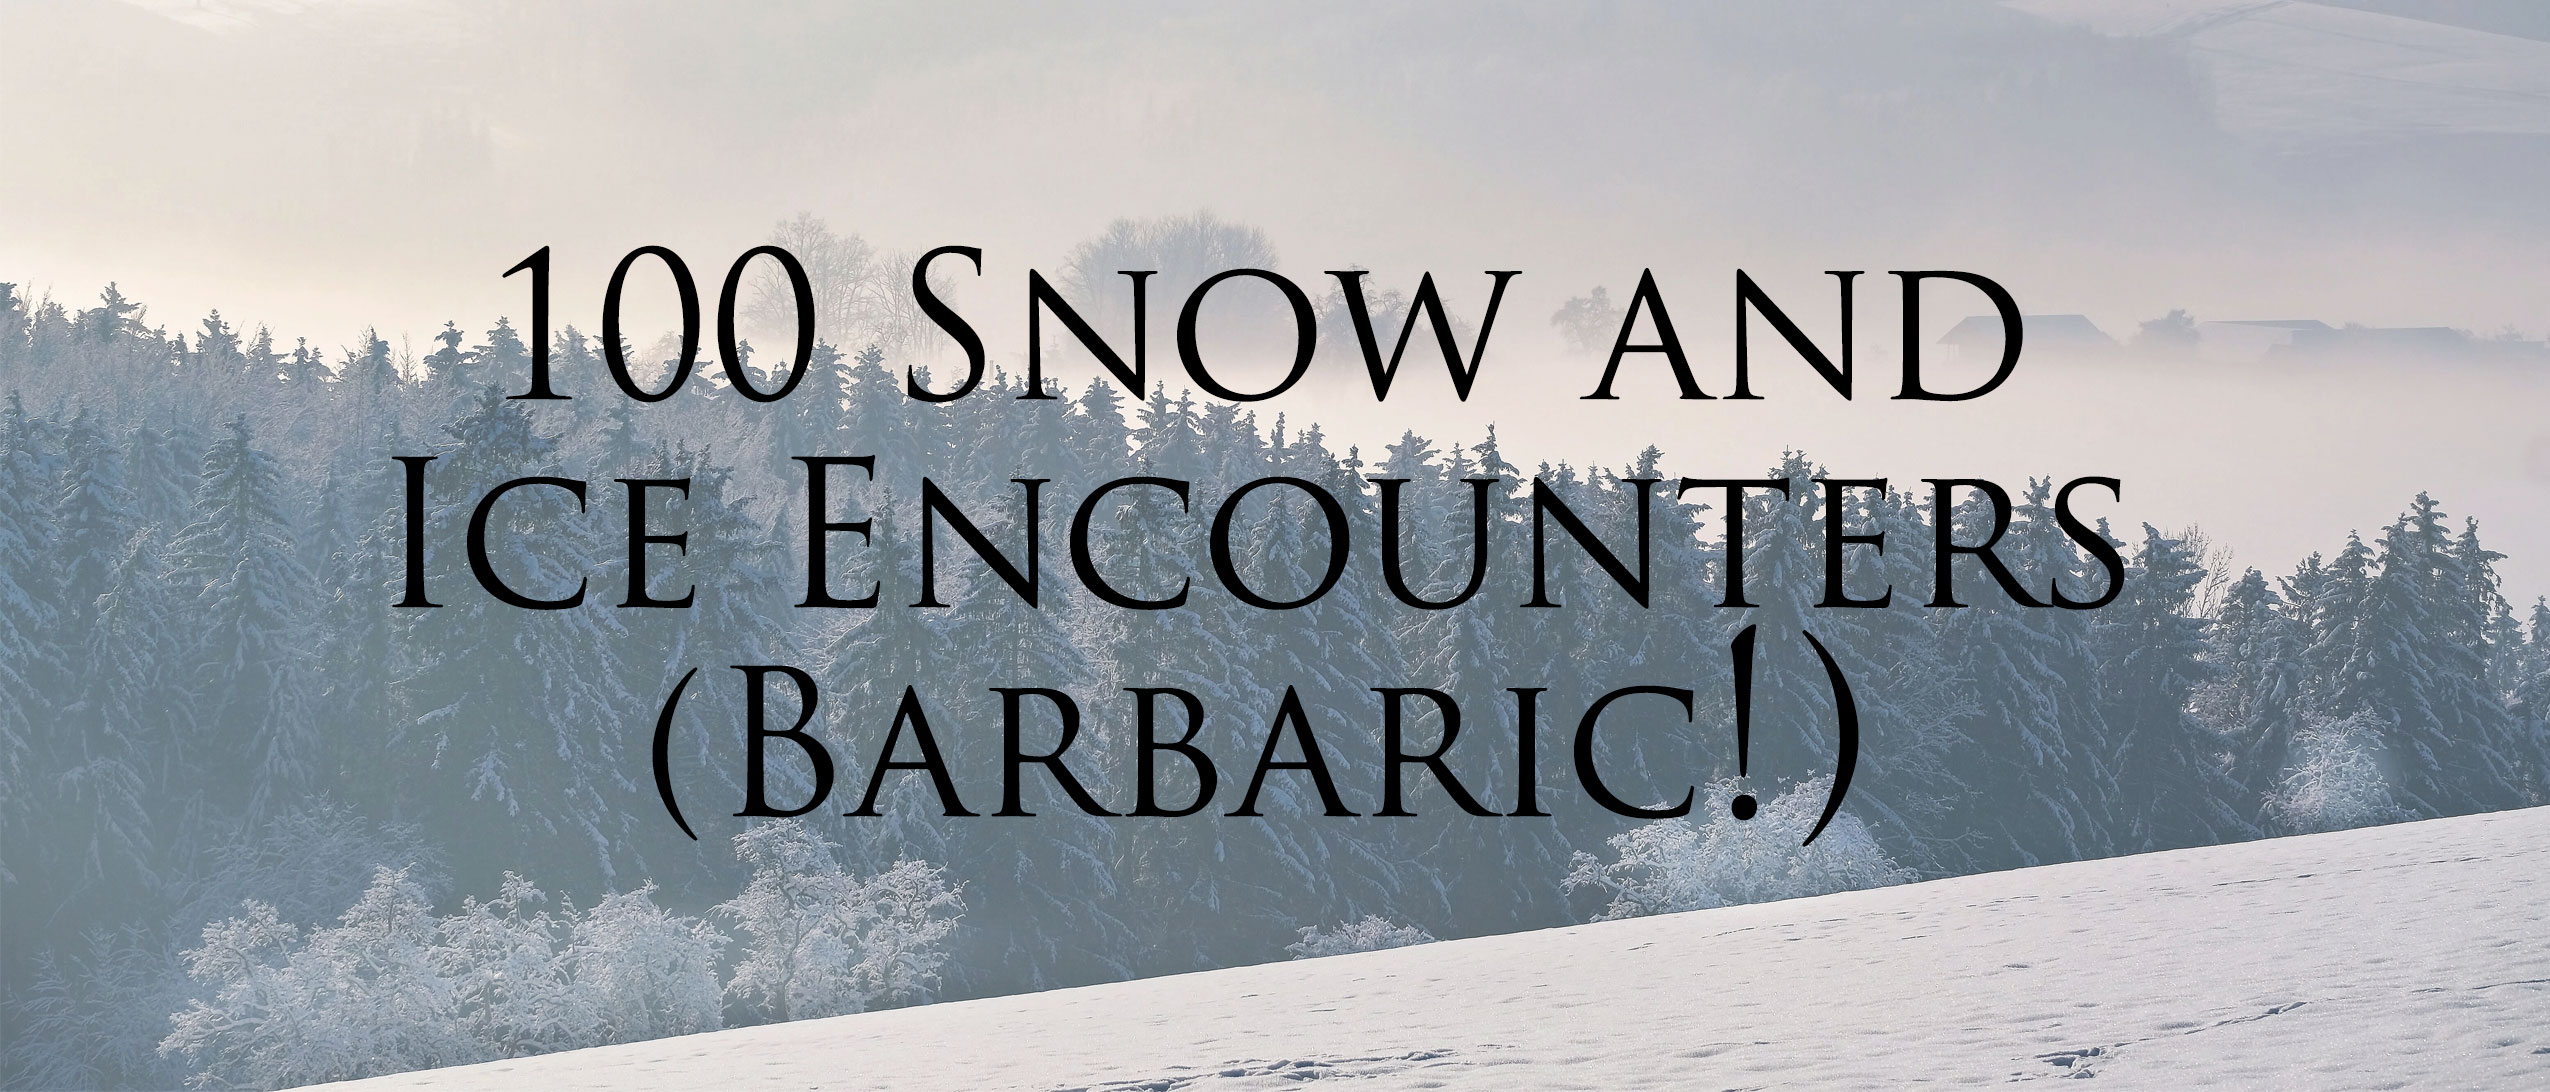 100 Snow and Ice Encounters (Barbaric!)